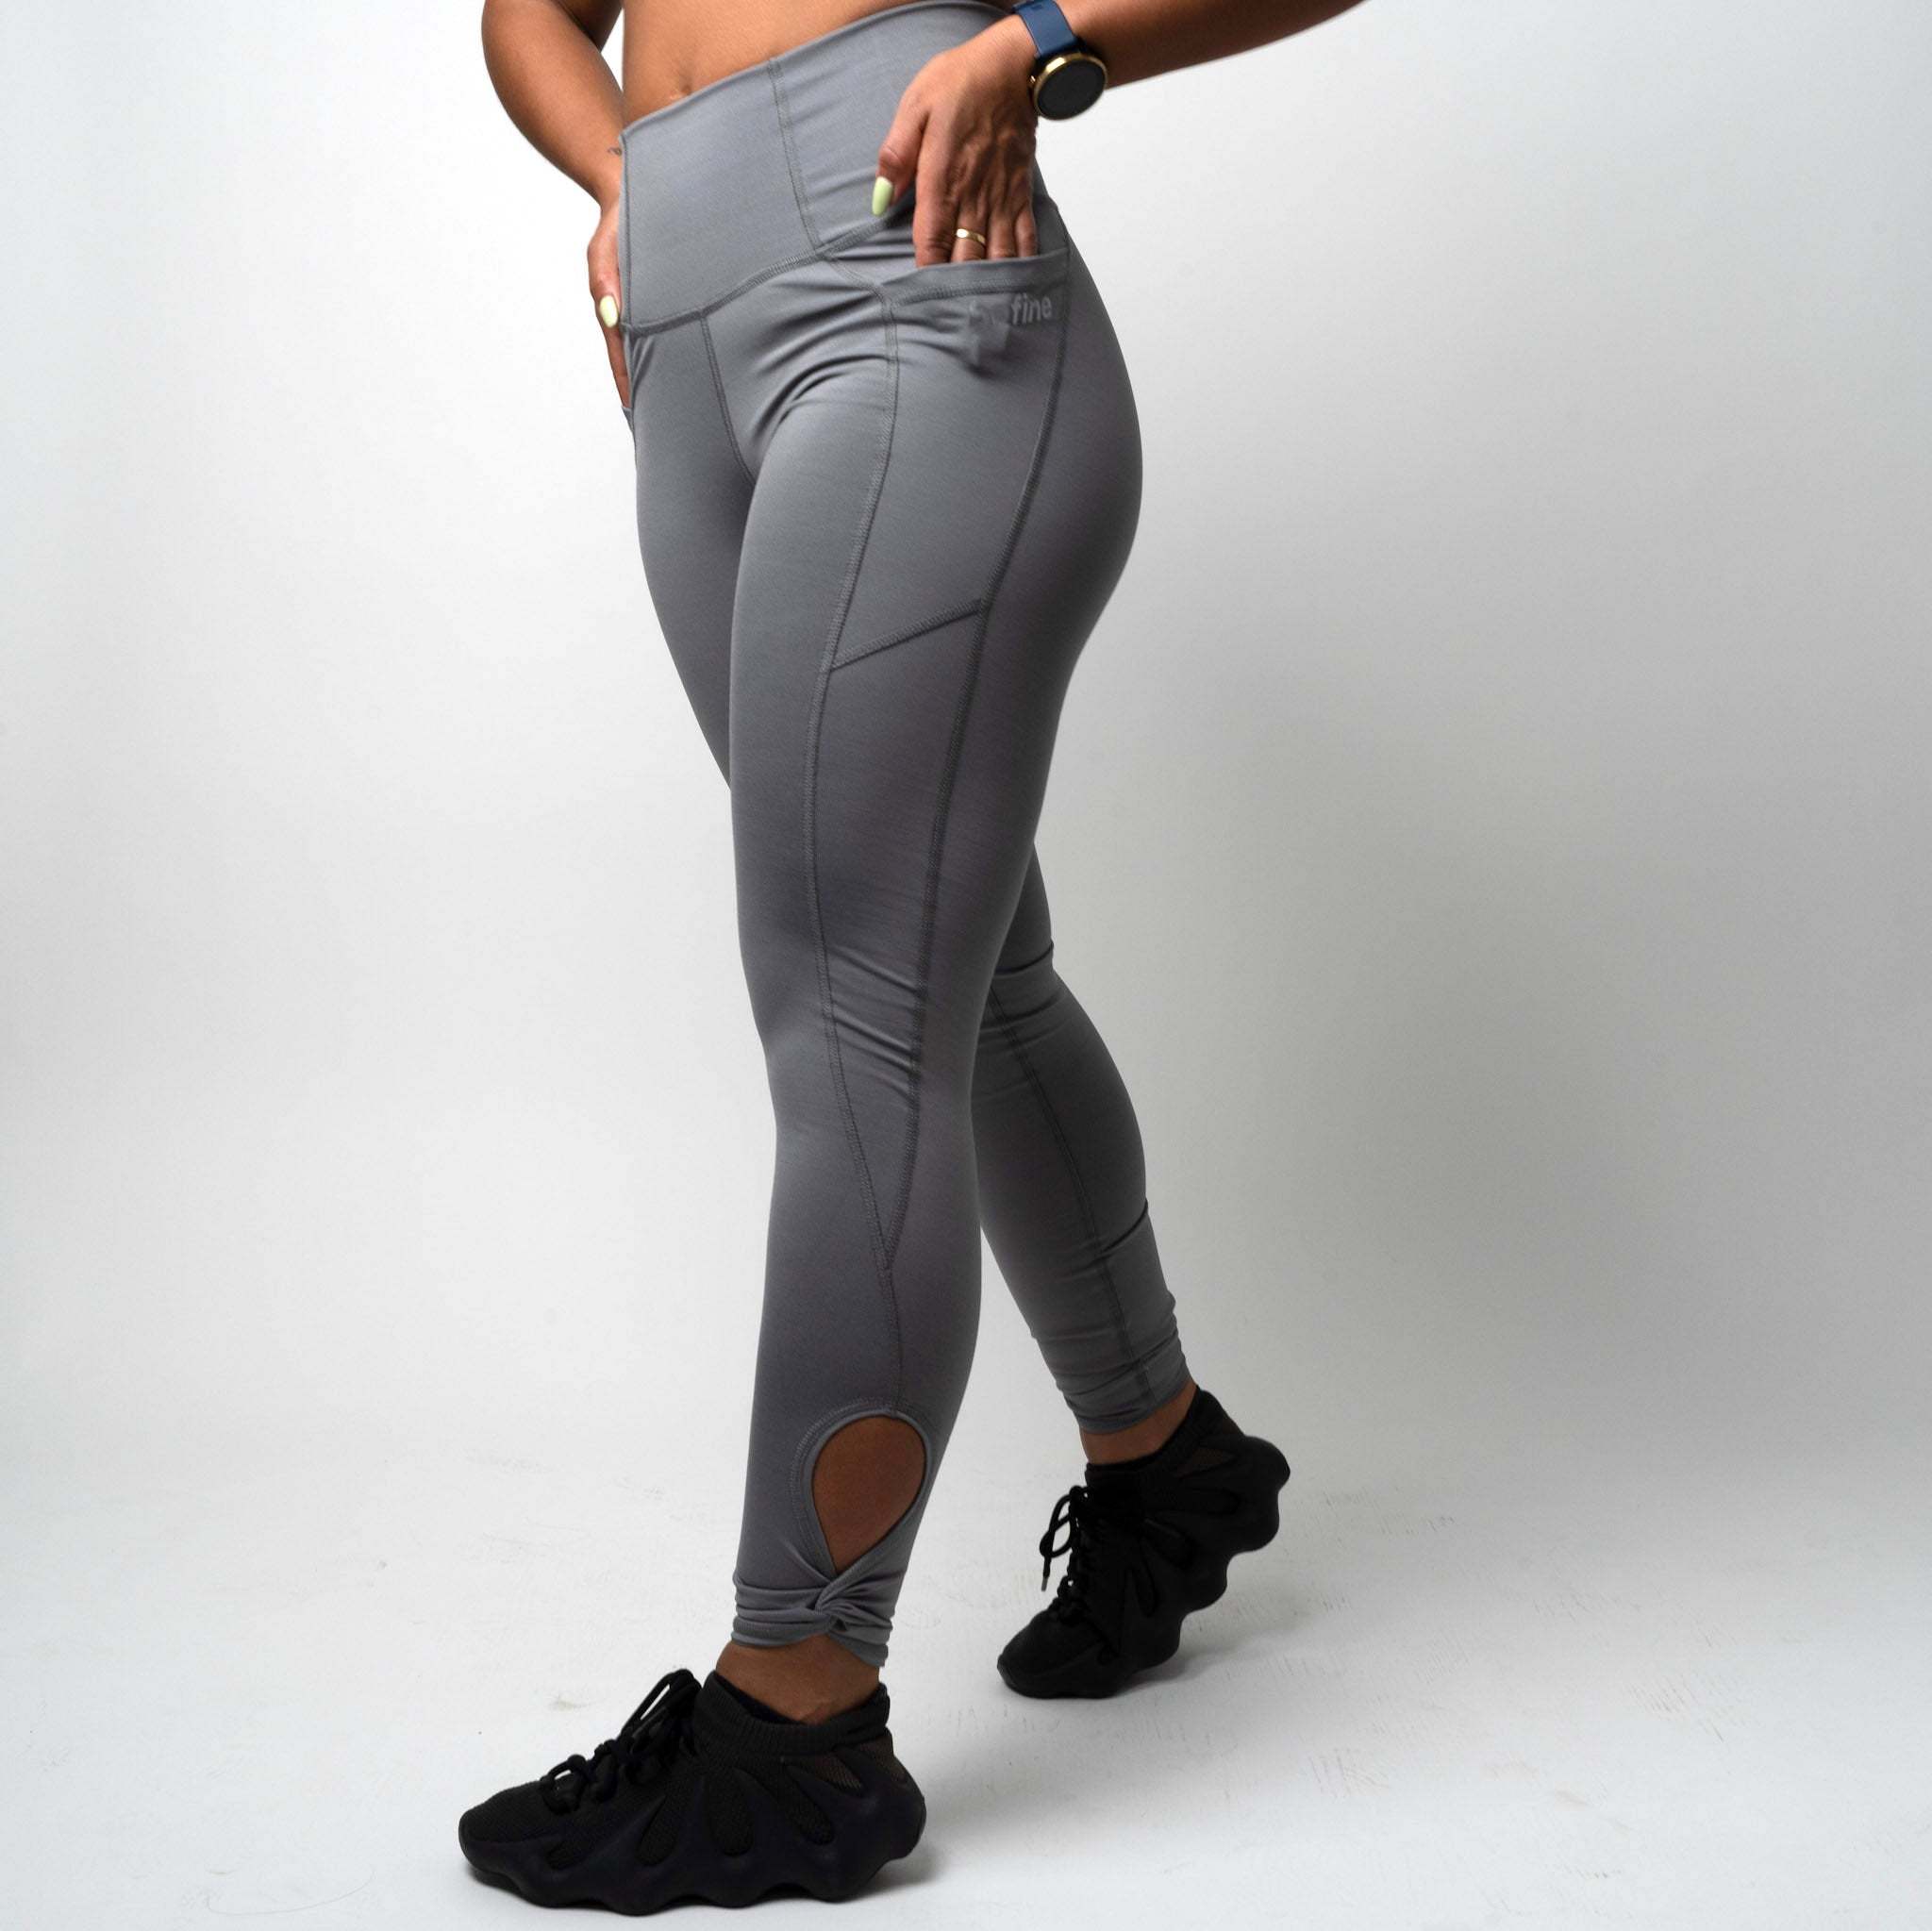 Twisted cut-out legging  Dark grey. – Up10 activewear